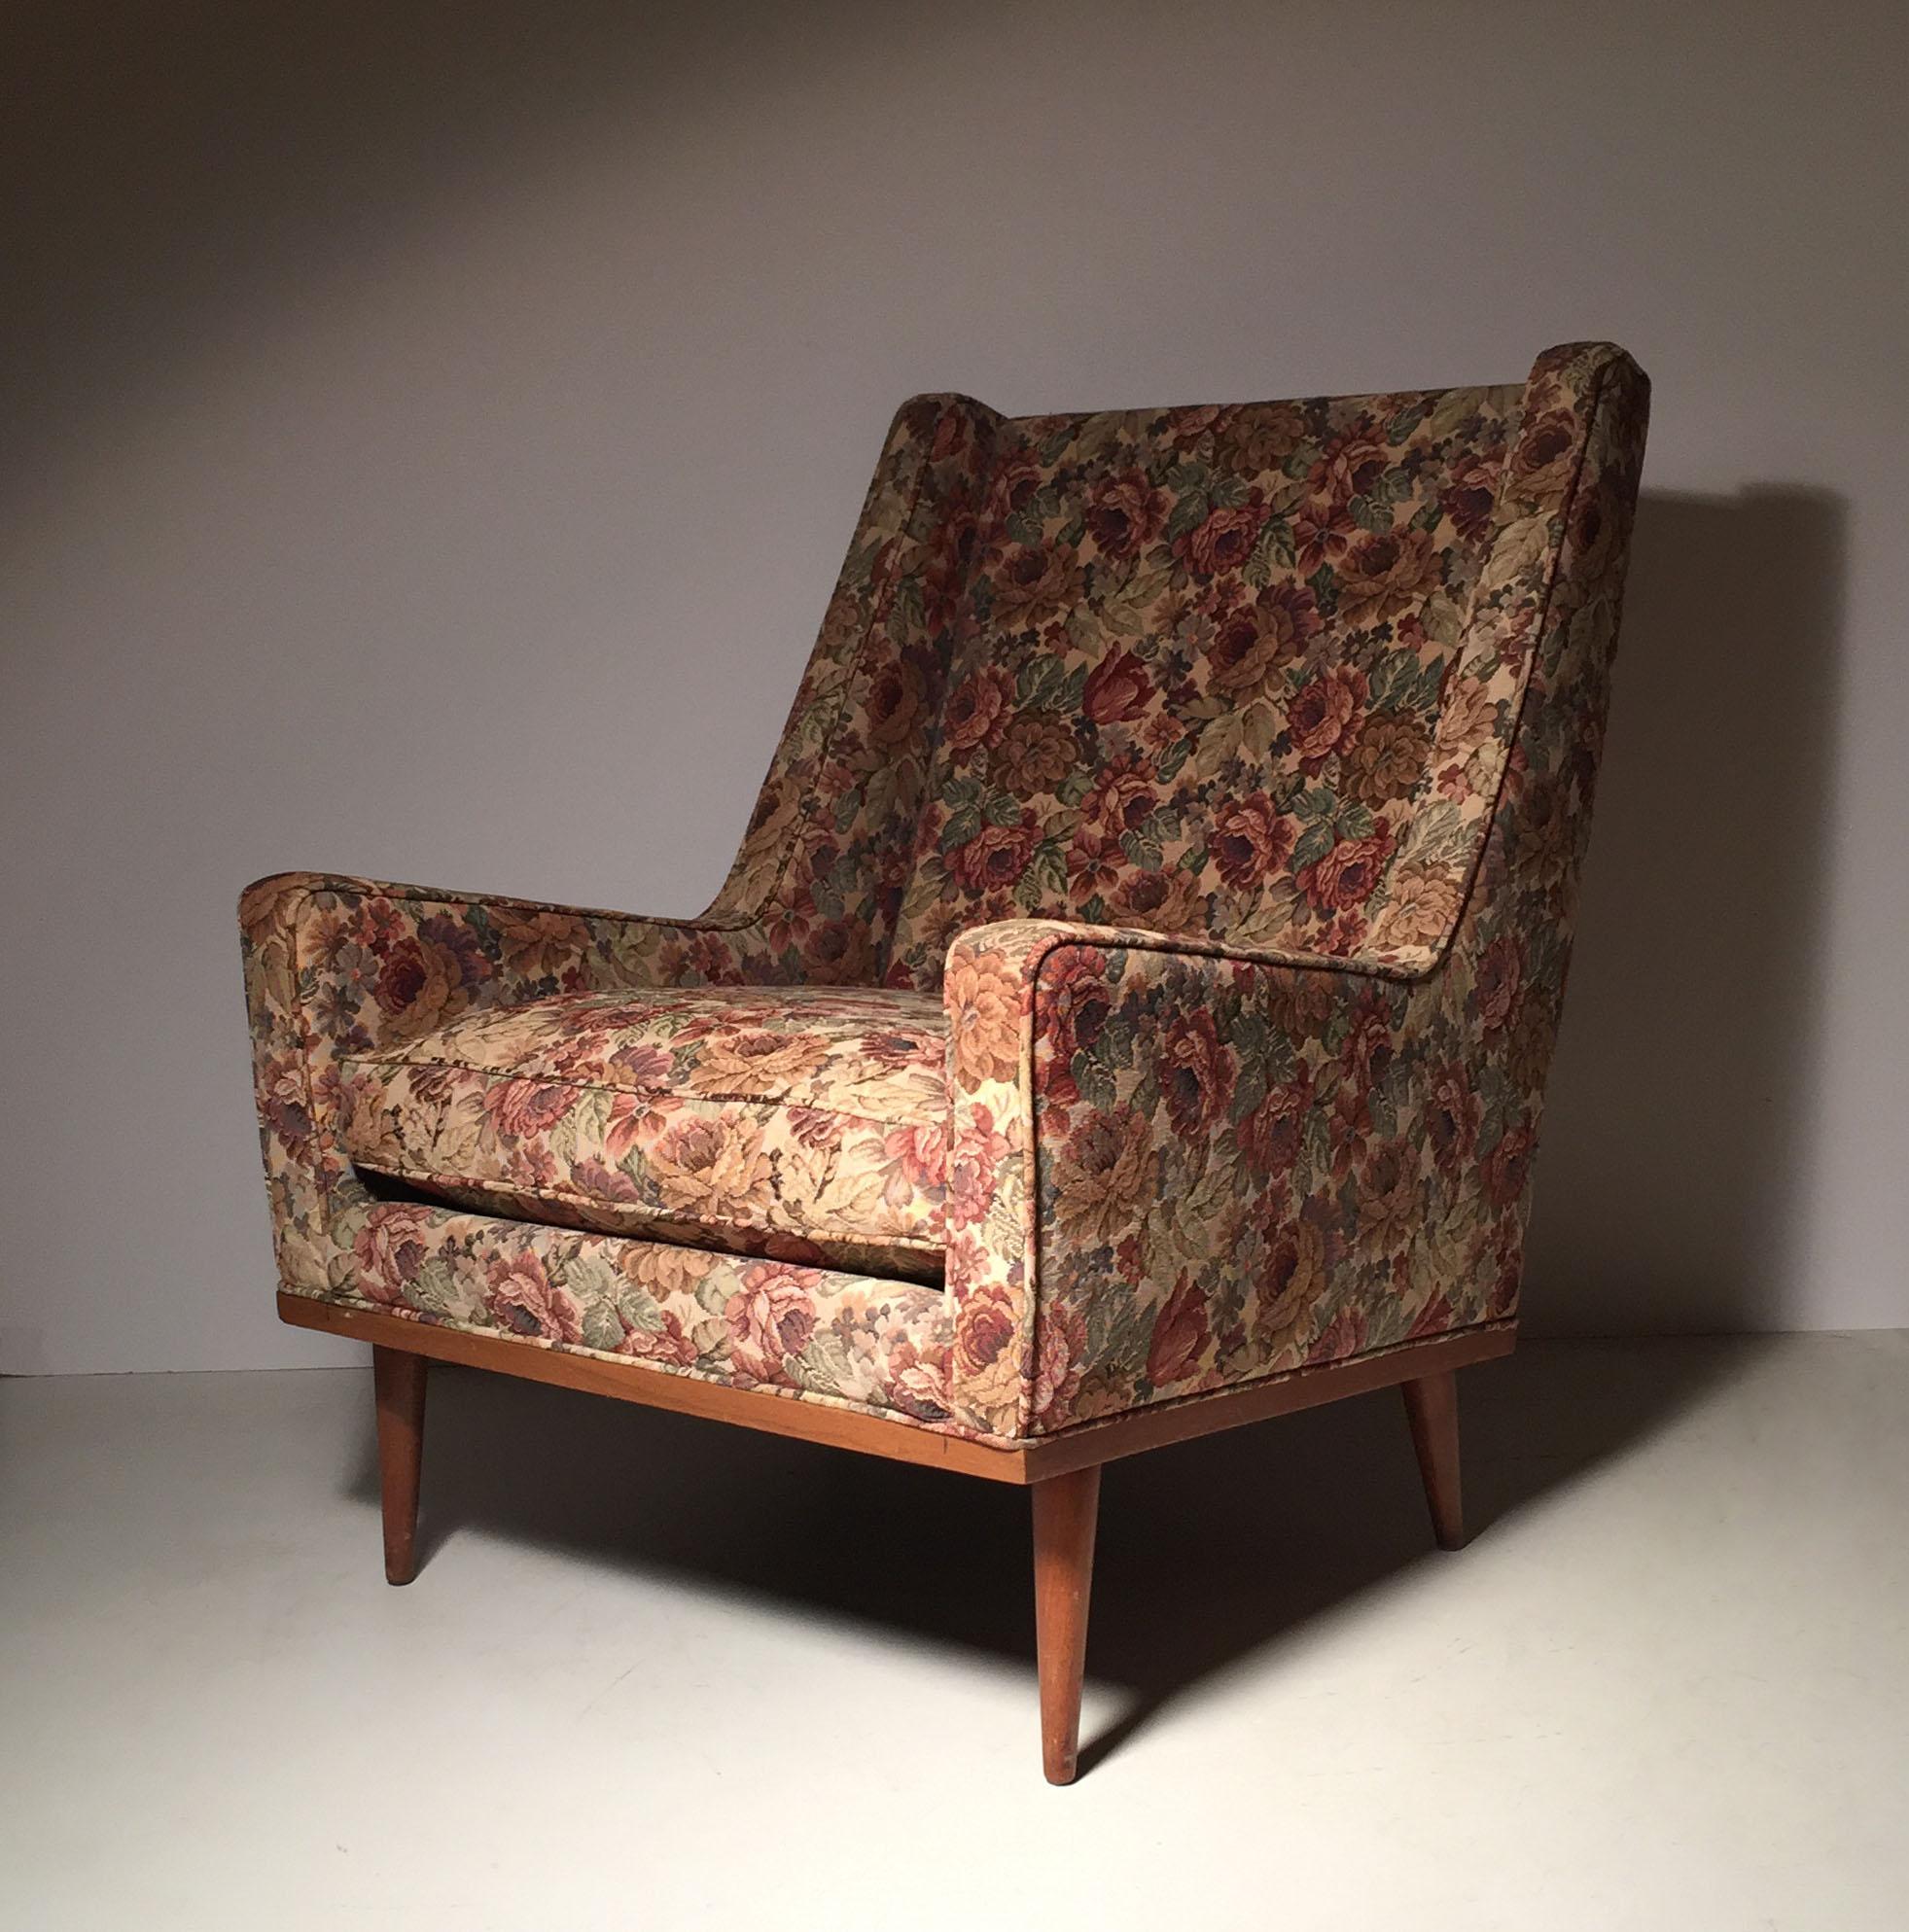 A nice early pair of designer chairs by Milo Baughman. Were reupholstered sometime in the 1980s-1990s. If the floral fabric is desirable then I believe the condition of fabric as-is is in good shape. Otherwise would be nice to reupholster. Plus